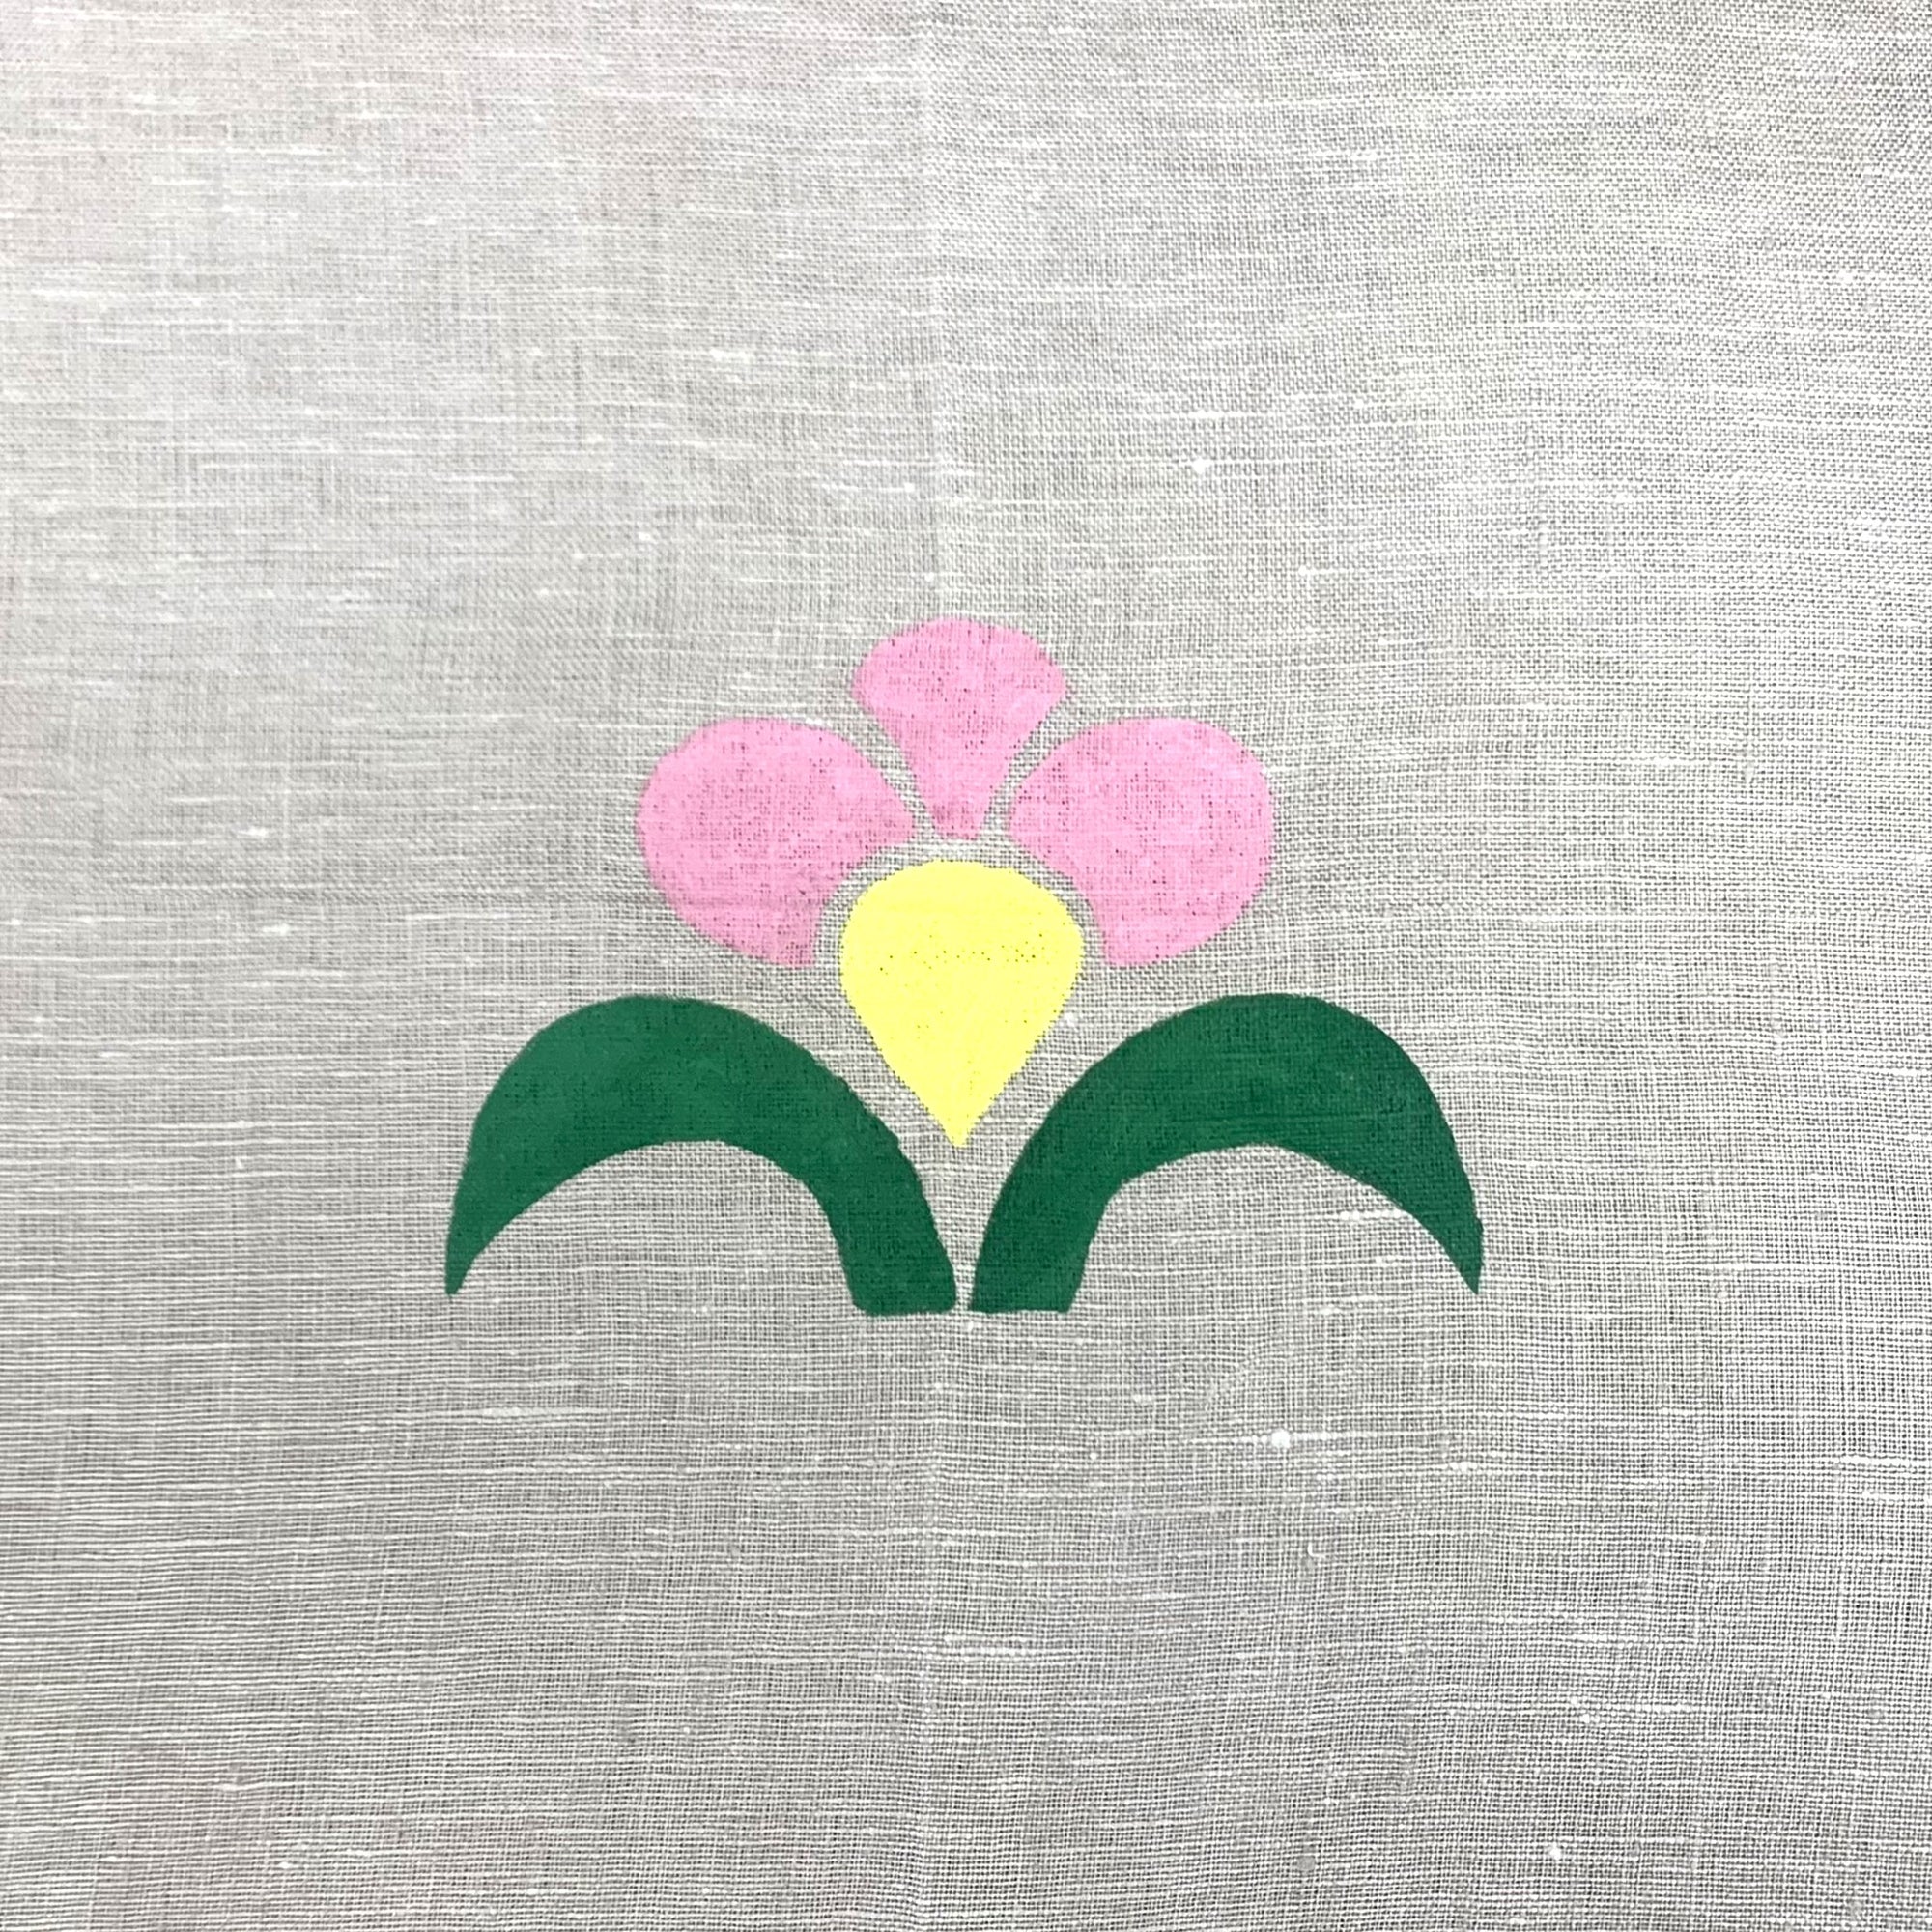 Painted pink flower with a yellow bud and green leaves using a stencil on beige linen fabric.